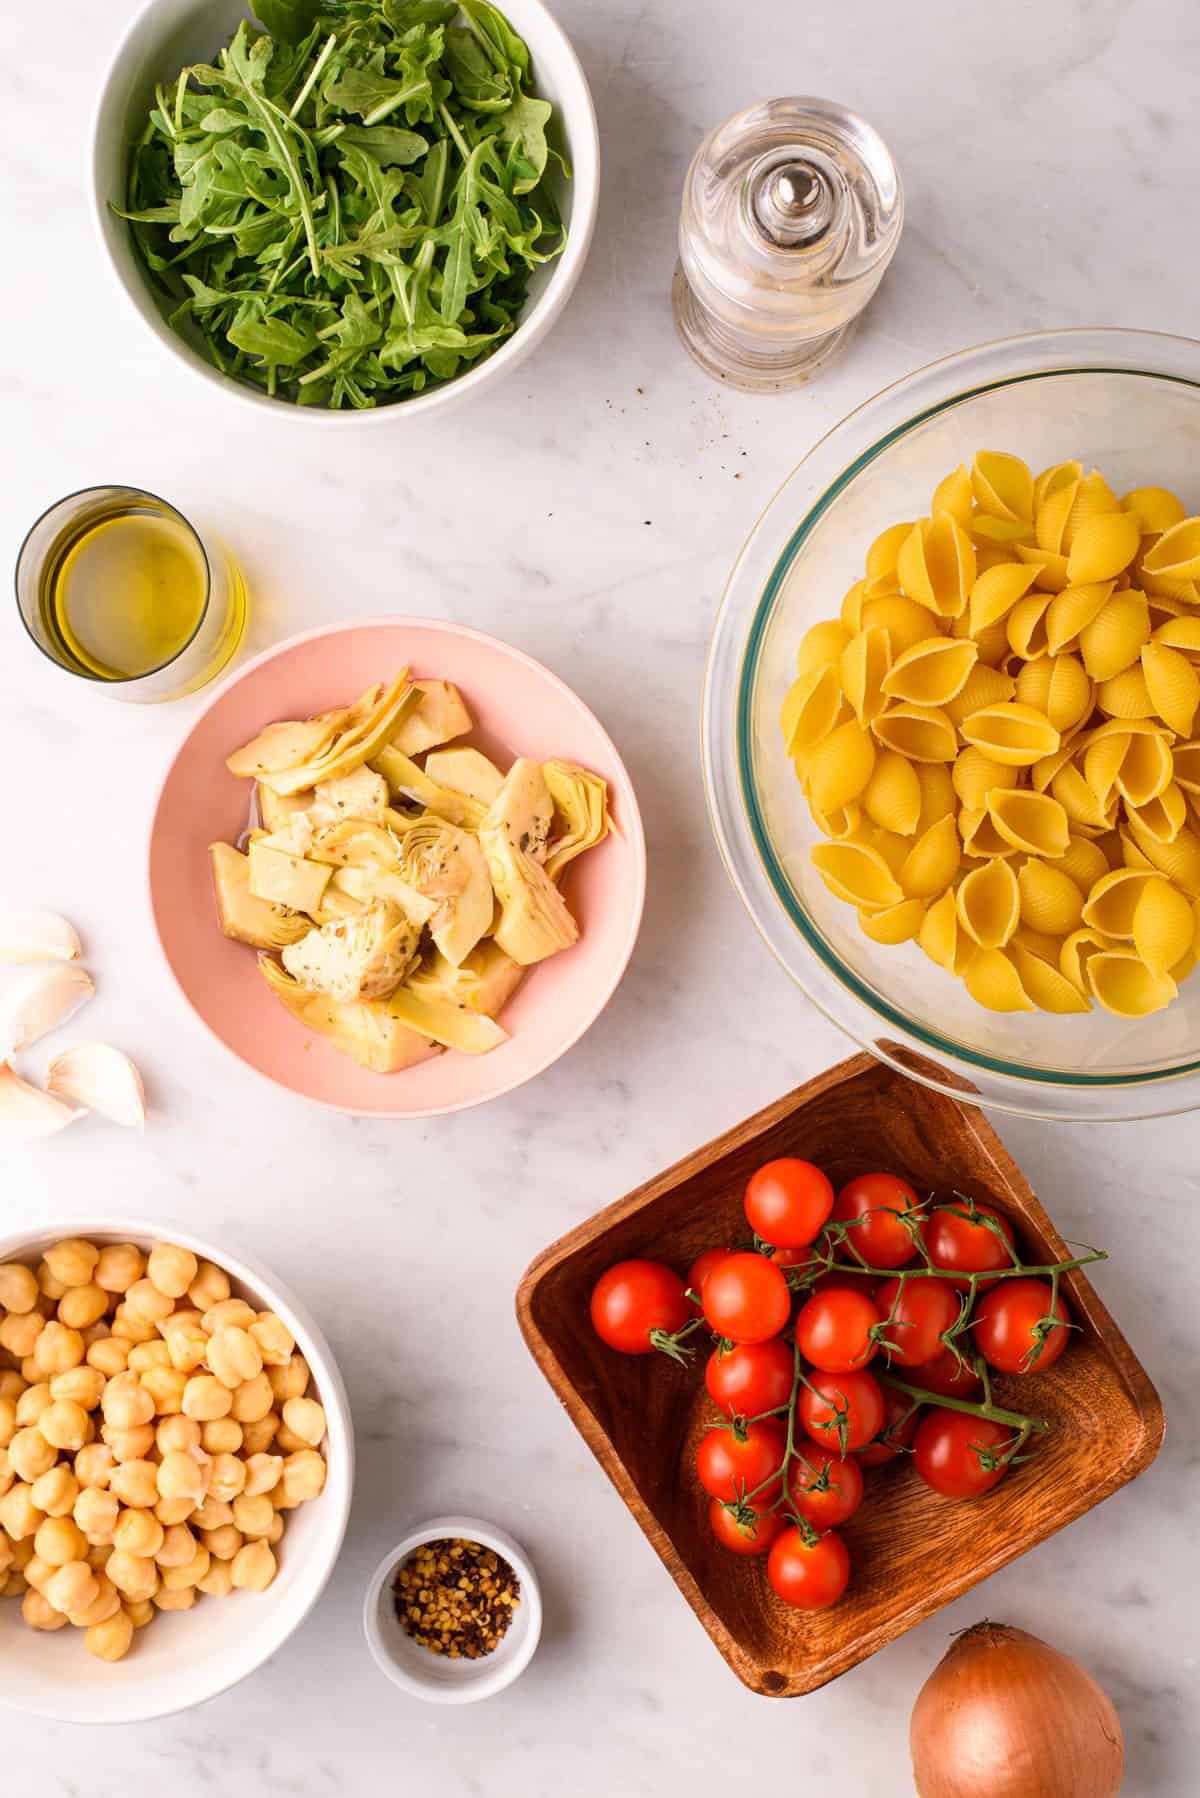 Ingredients gathered to make a no-mayo summer pasta salad: olive oil, arugula, pasta, marinated artichokes, cherry tomatoes, and chickpeas